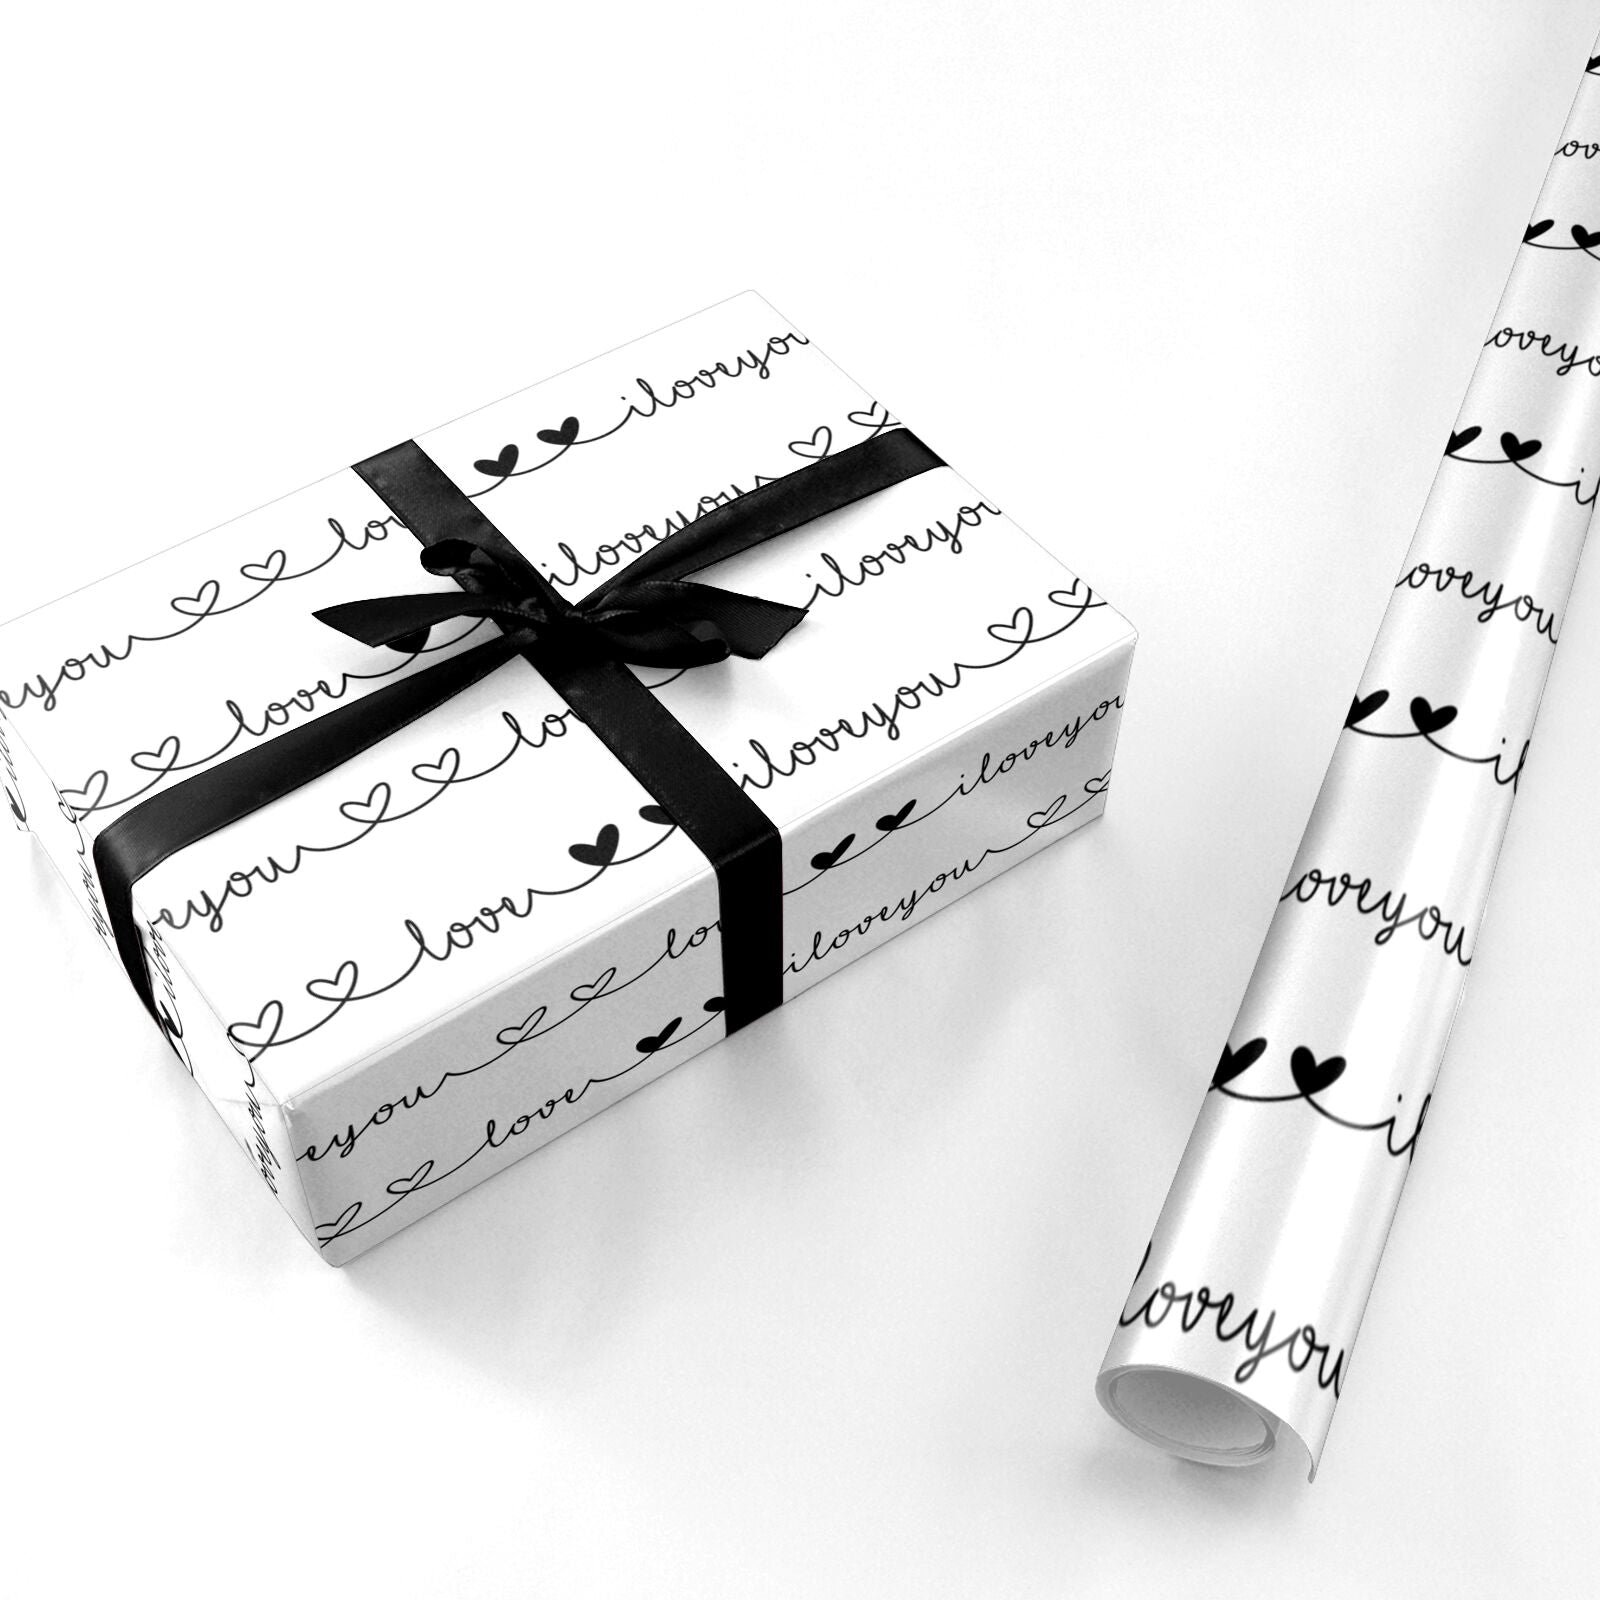 Love this simple, white wrapping paper.